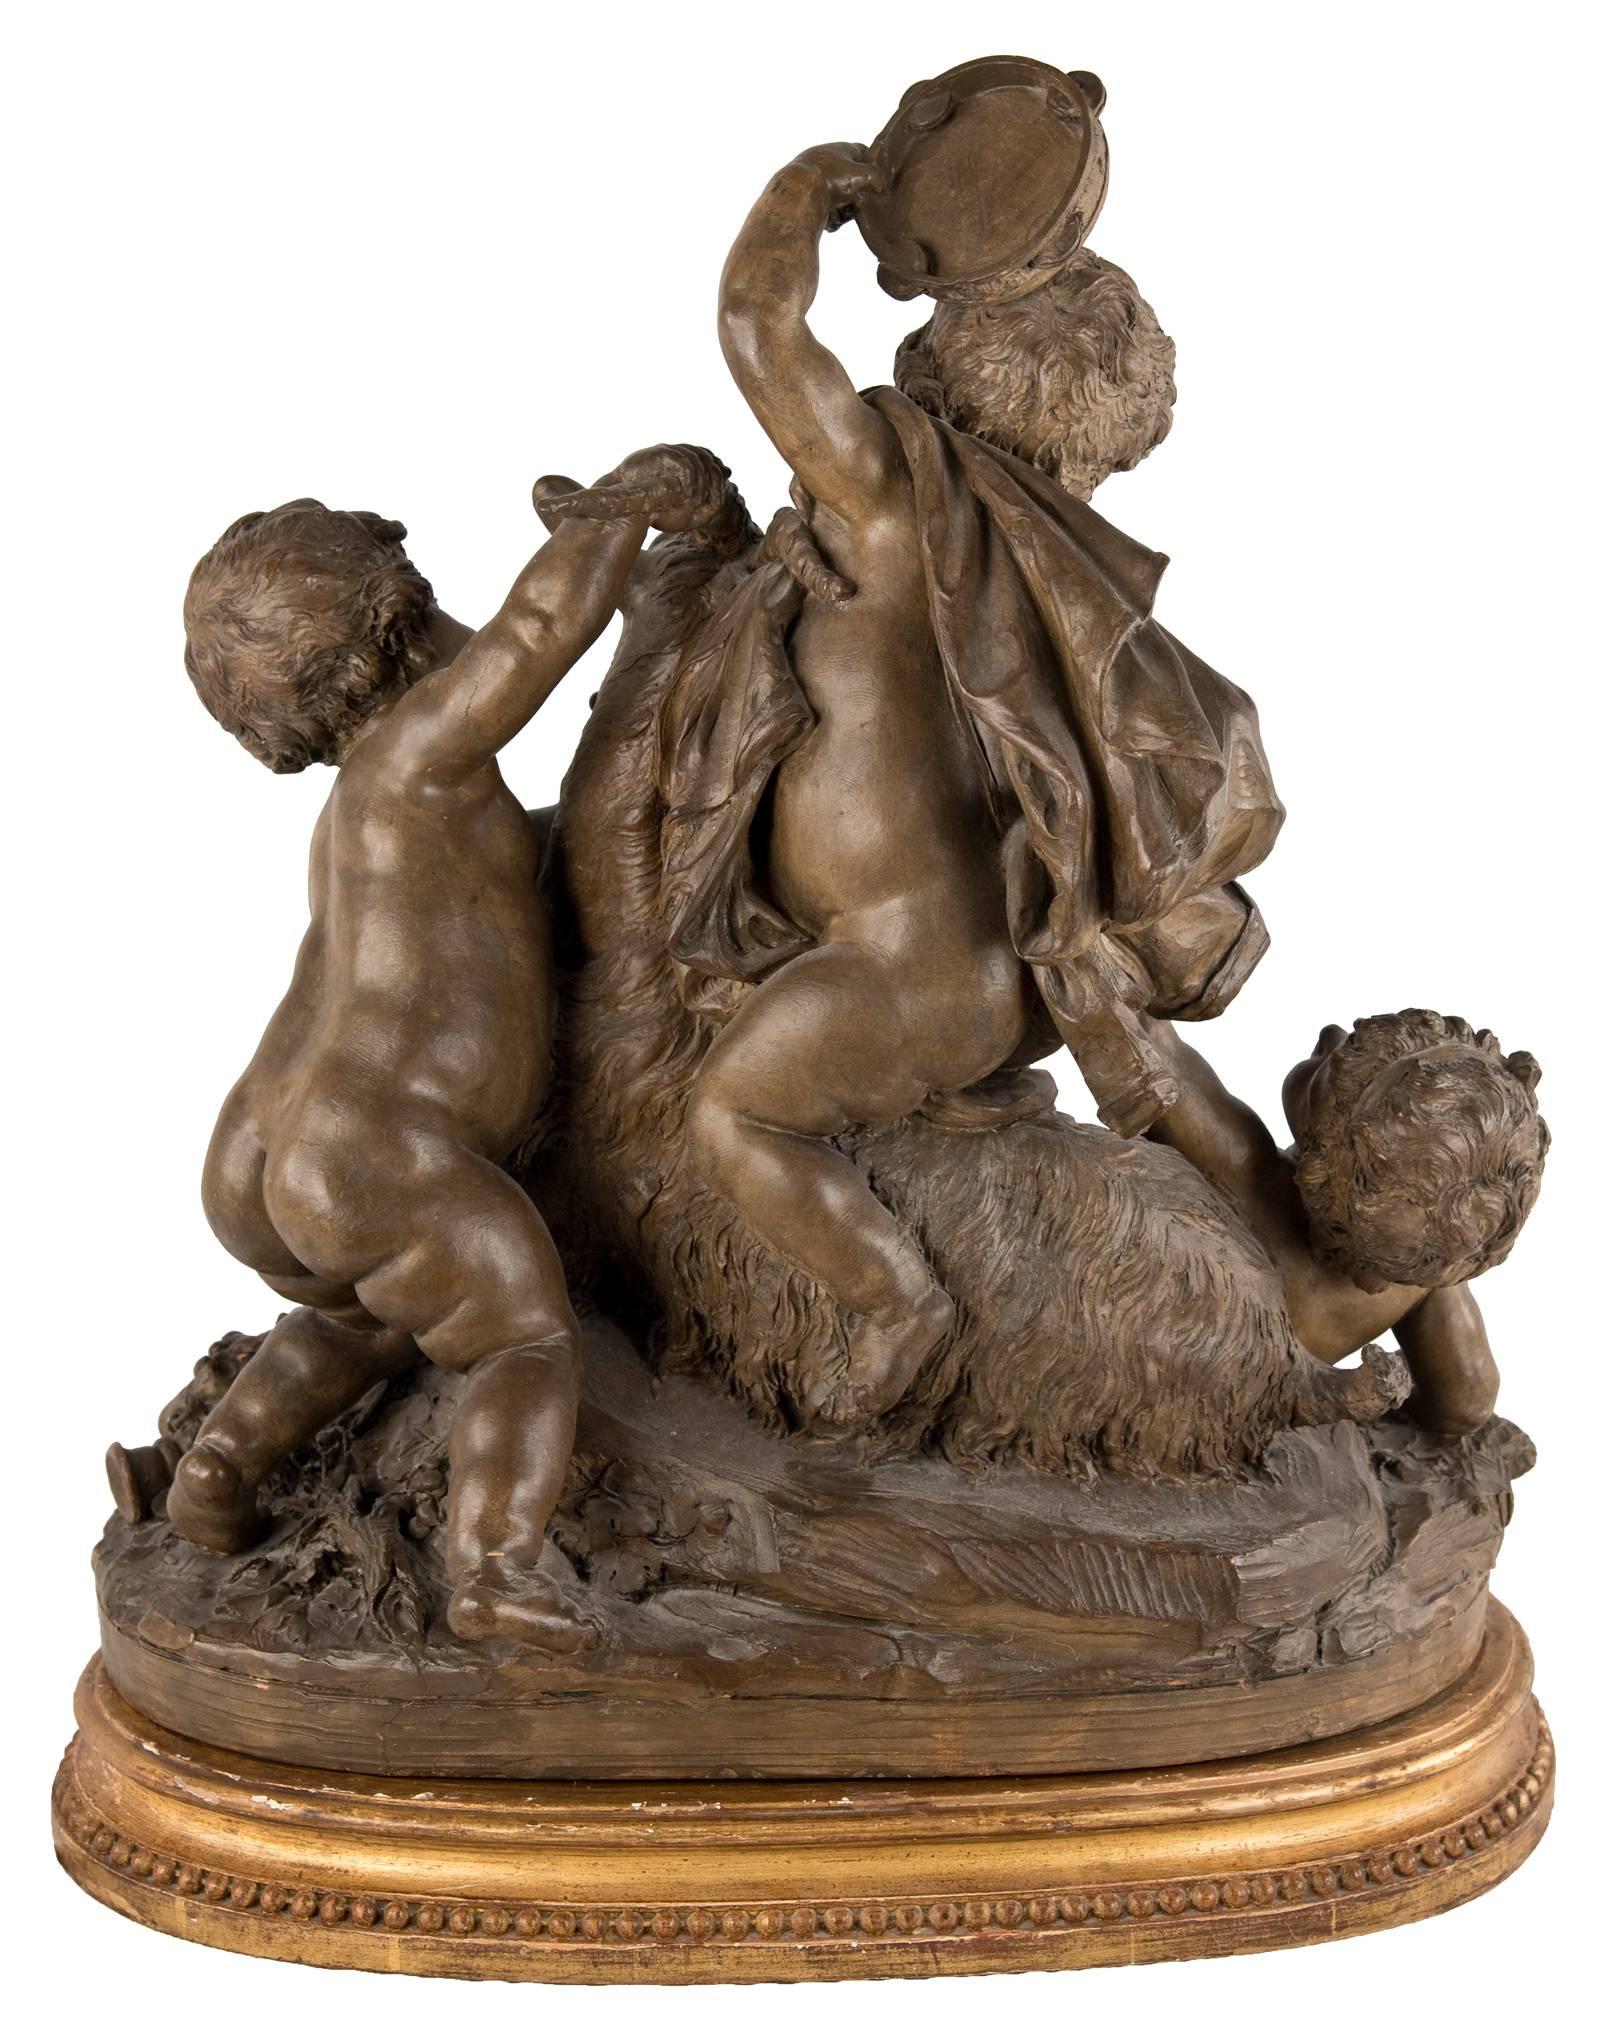 A patinated terra-cotta grouping of a horned goat surrounded by playful putti on a gilt wooden plinth with beaded edge detail. Captured in this piece is a sense of movement and enthusiastic energy as depicted through fruiting garlands, flowing